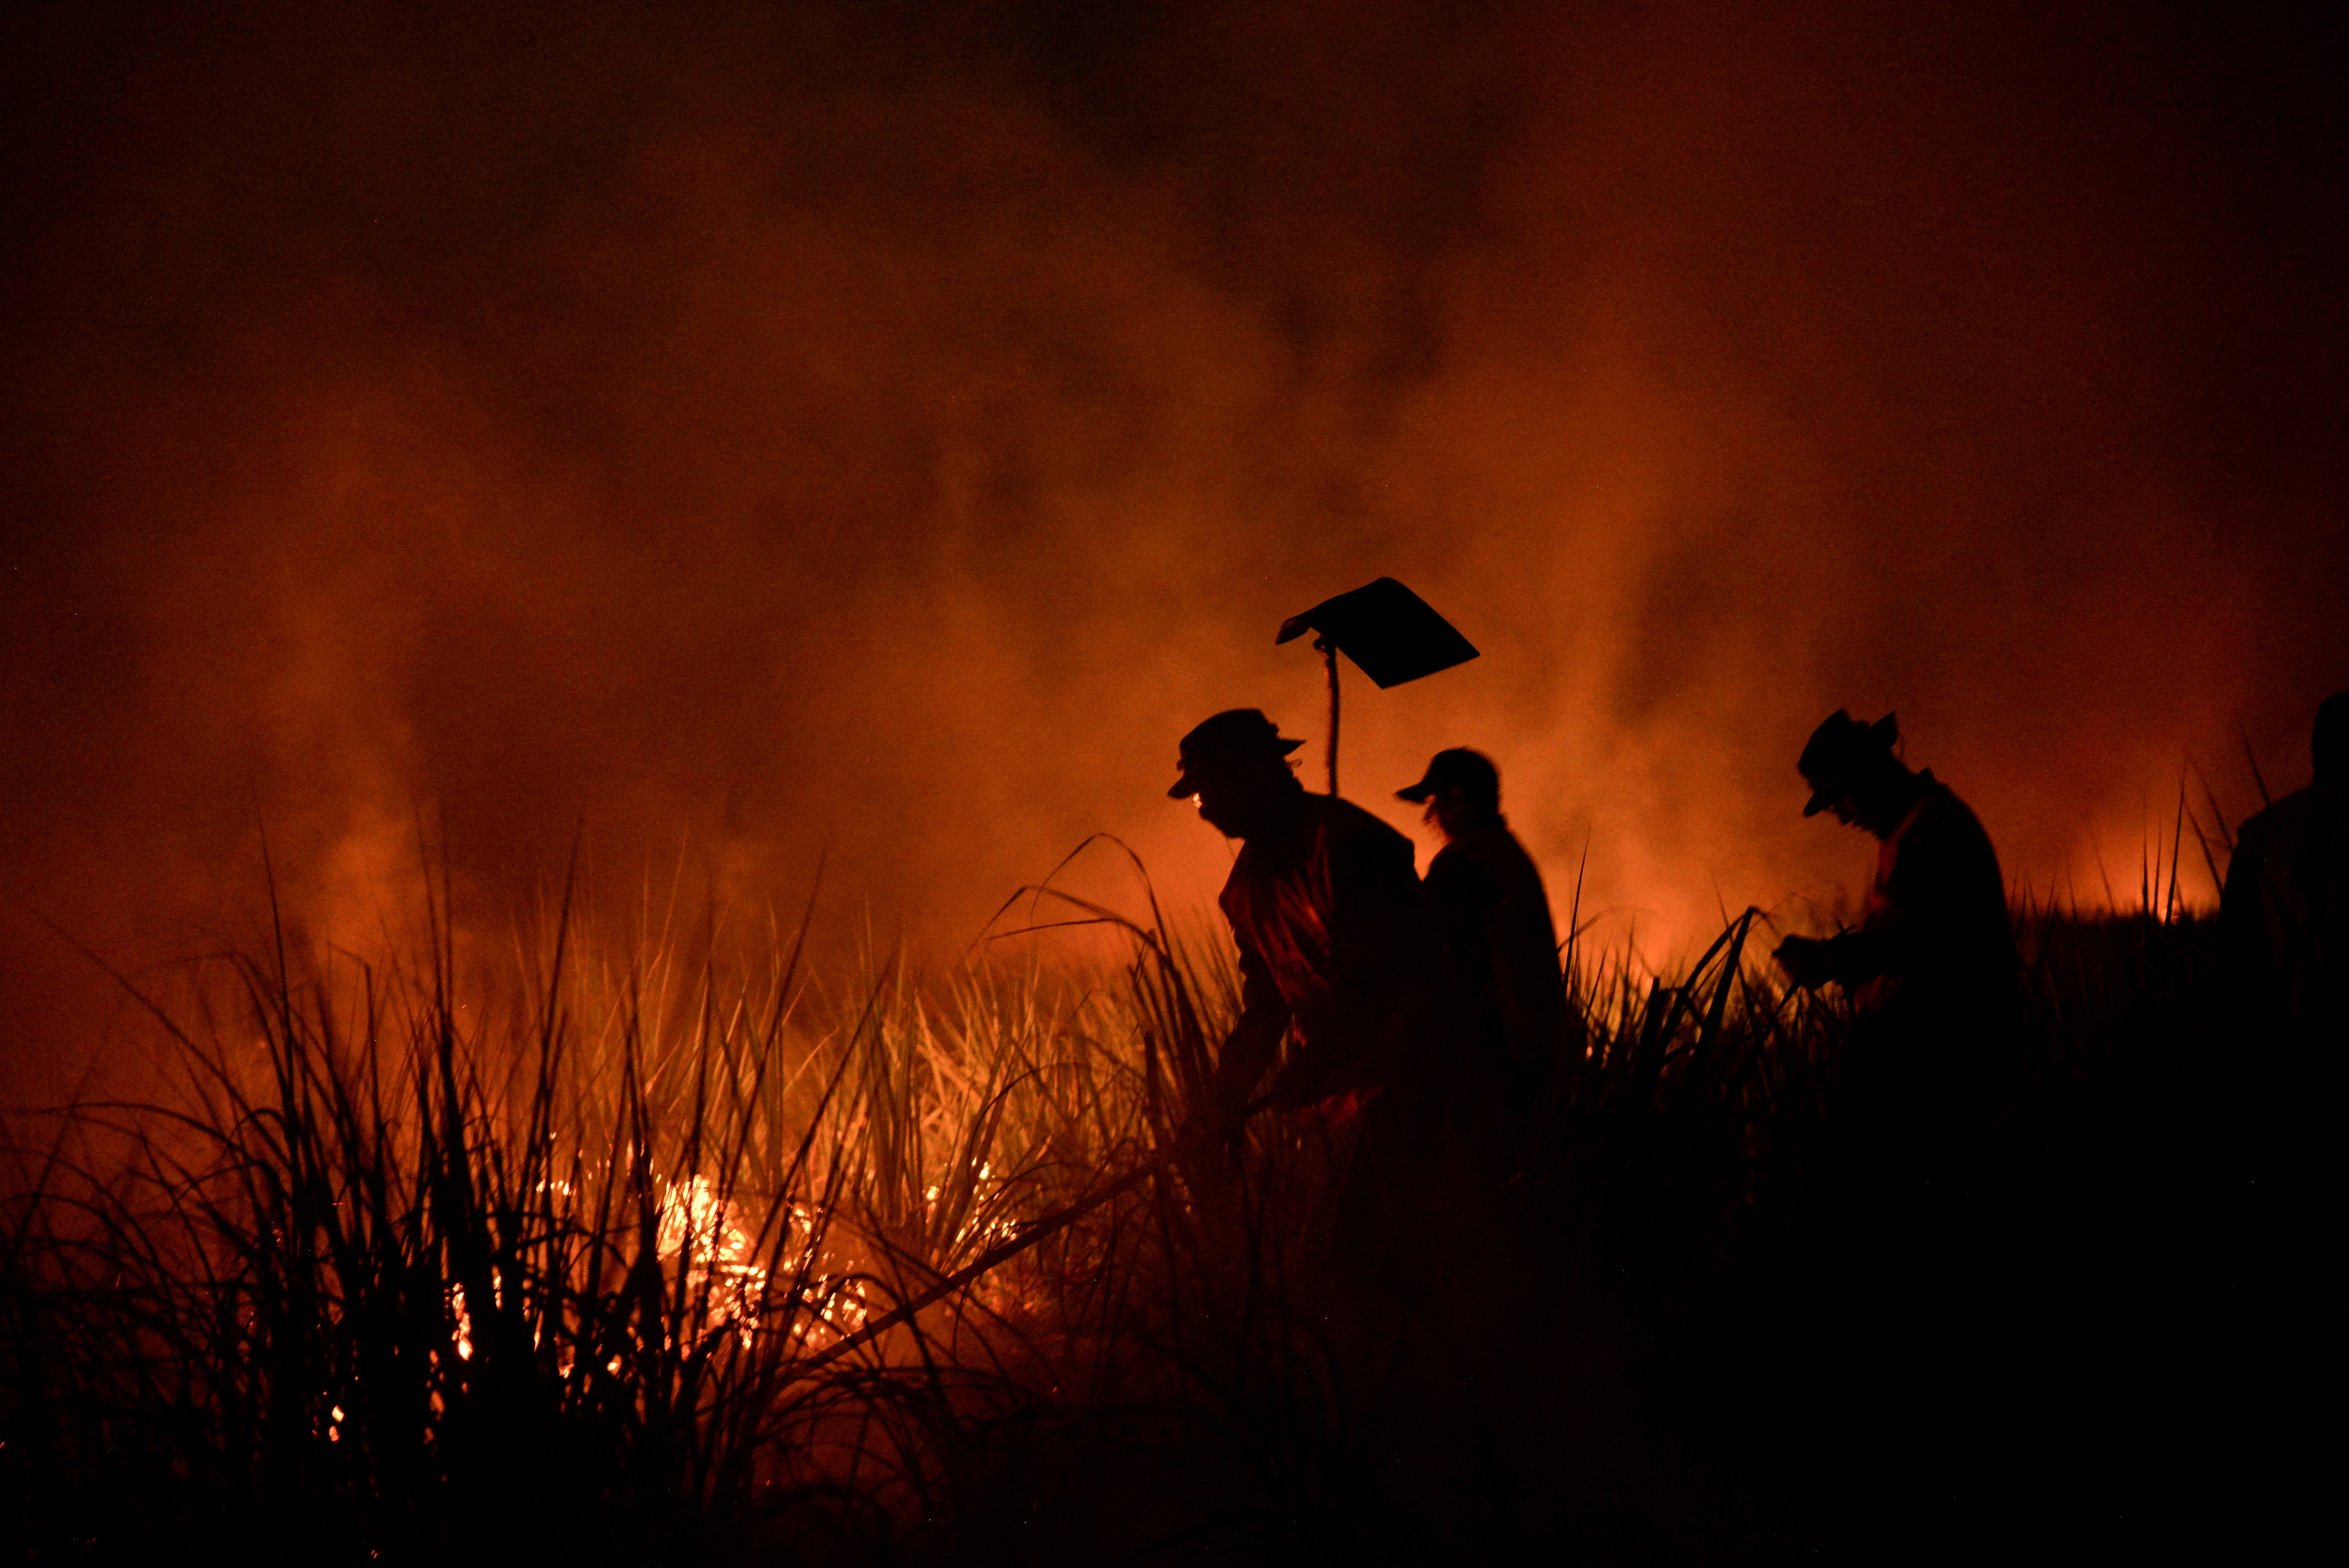 Firefighters tackle fire in a field as forest fires ravage the Bolivian Amazon, in San Buenaventura